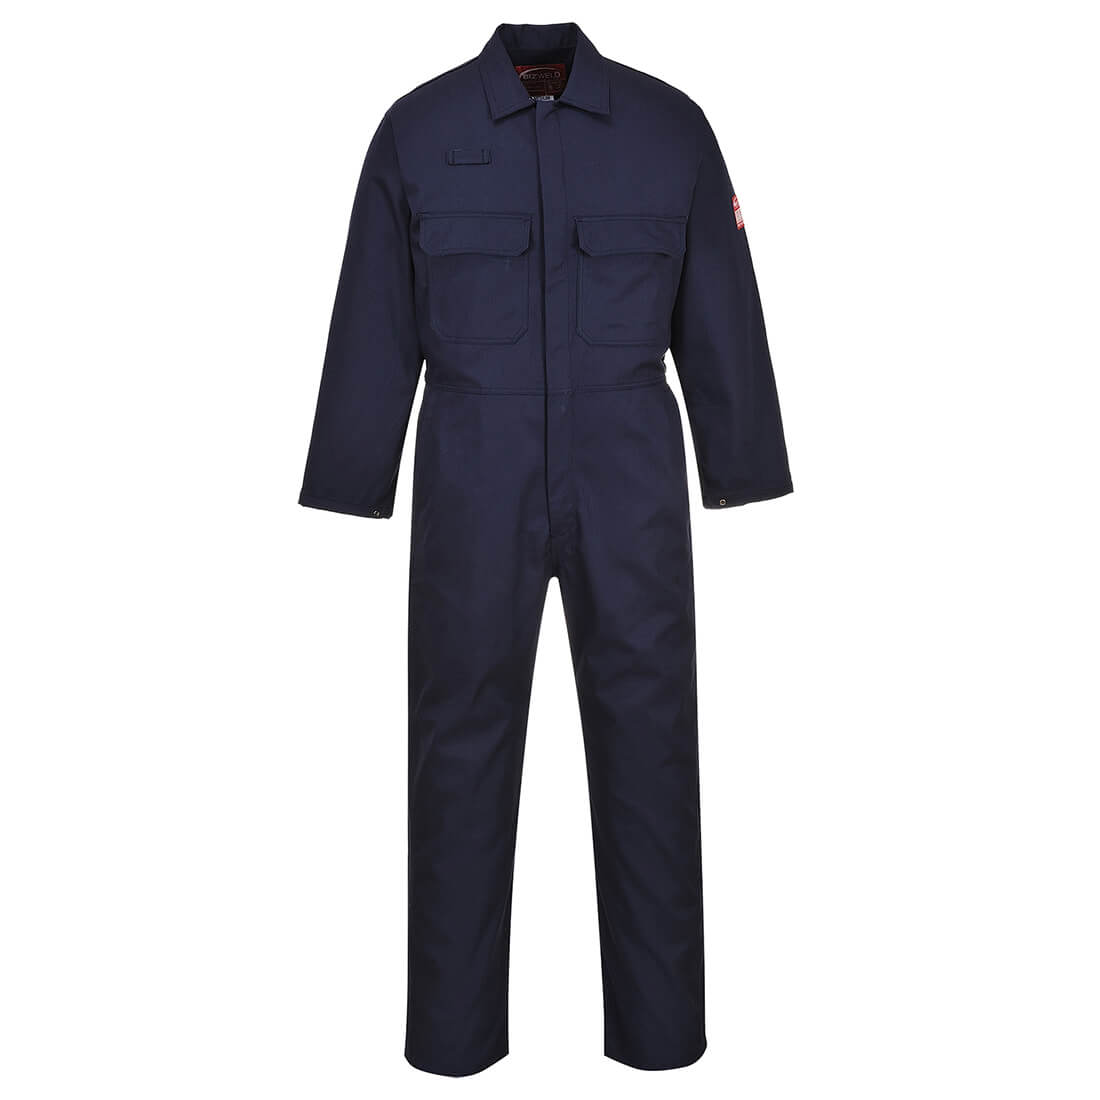 Image of Biz Weld Mens Flame Resistant Overall Navy Blue 5XL 34"